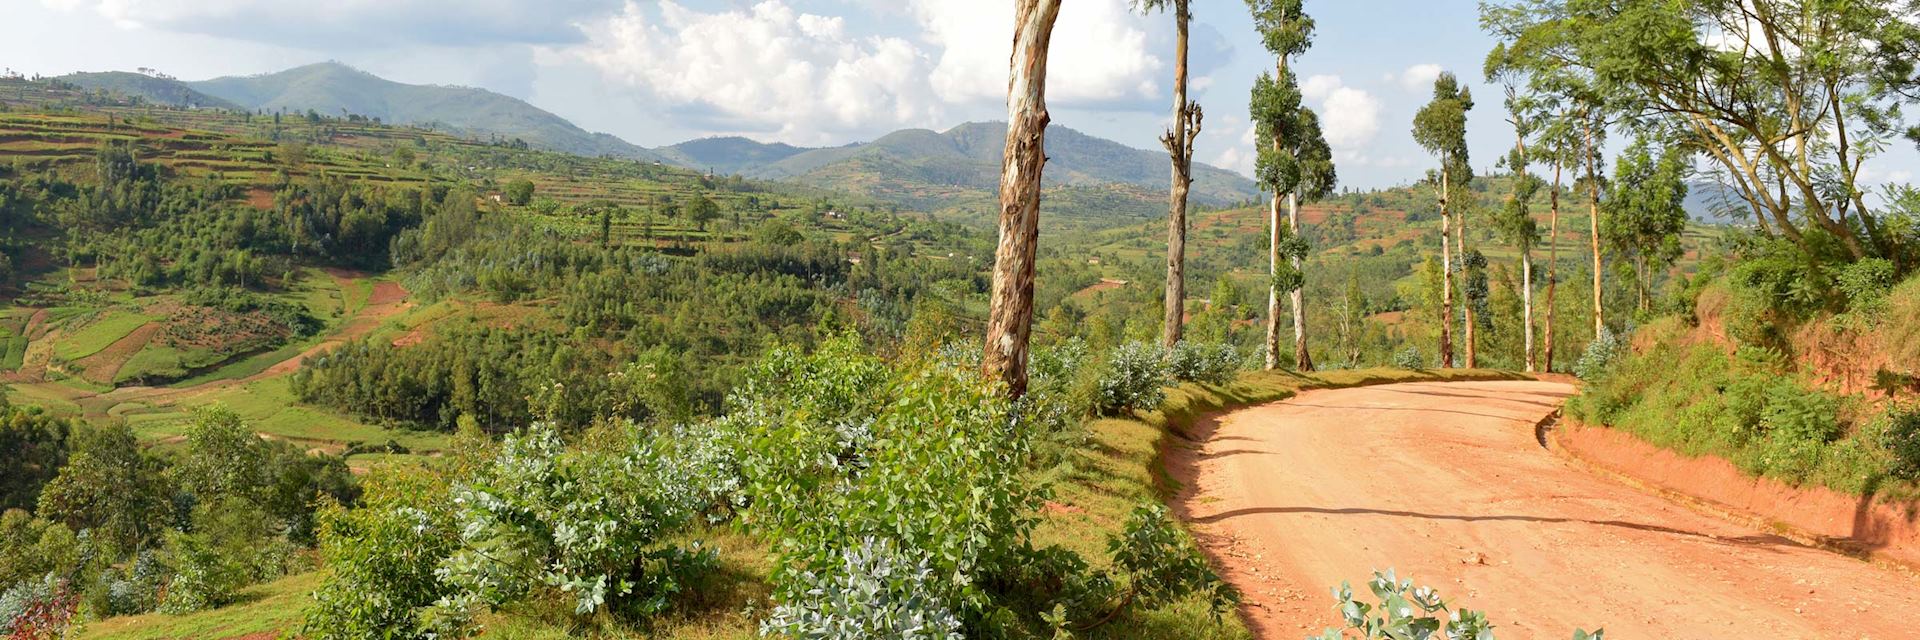 Road from Butare